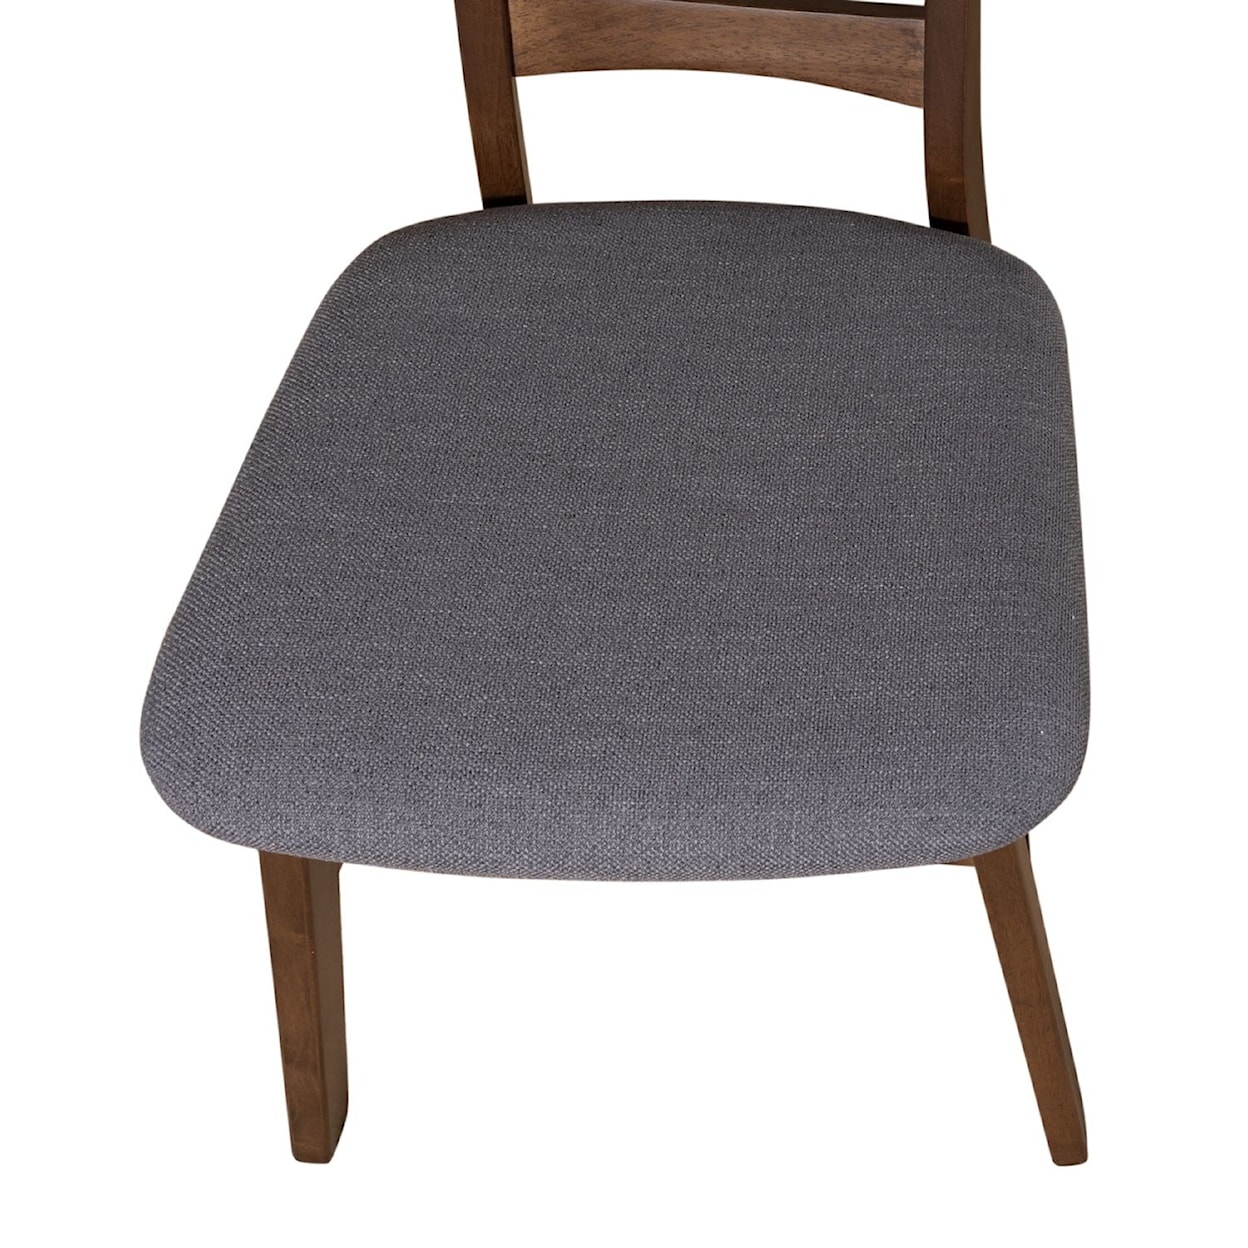 Liberty Furniture Space Savers Panel Back Side Chair